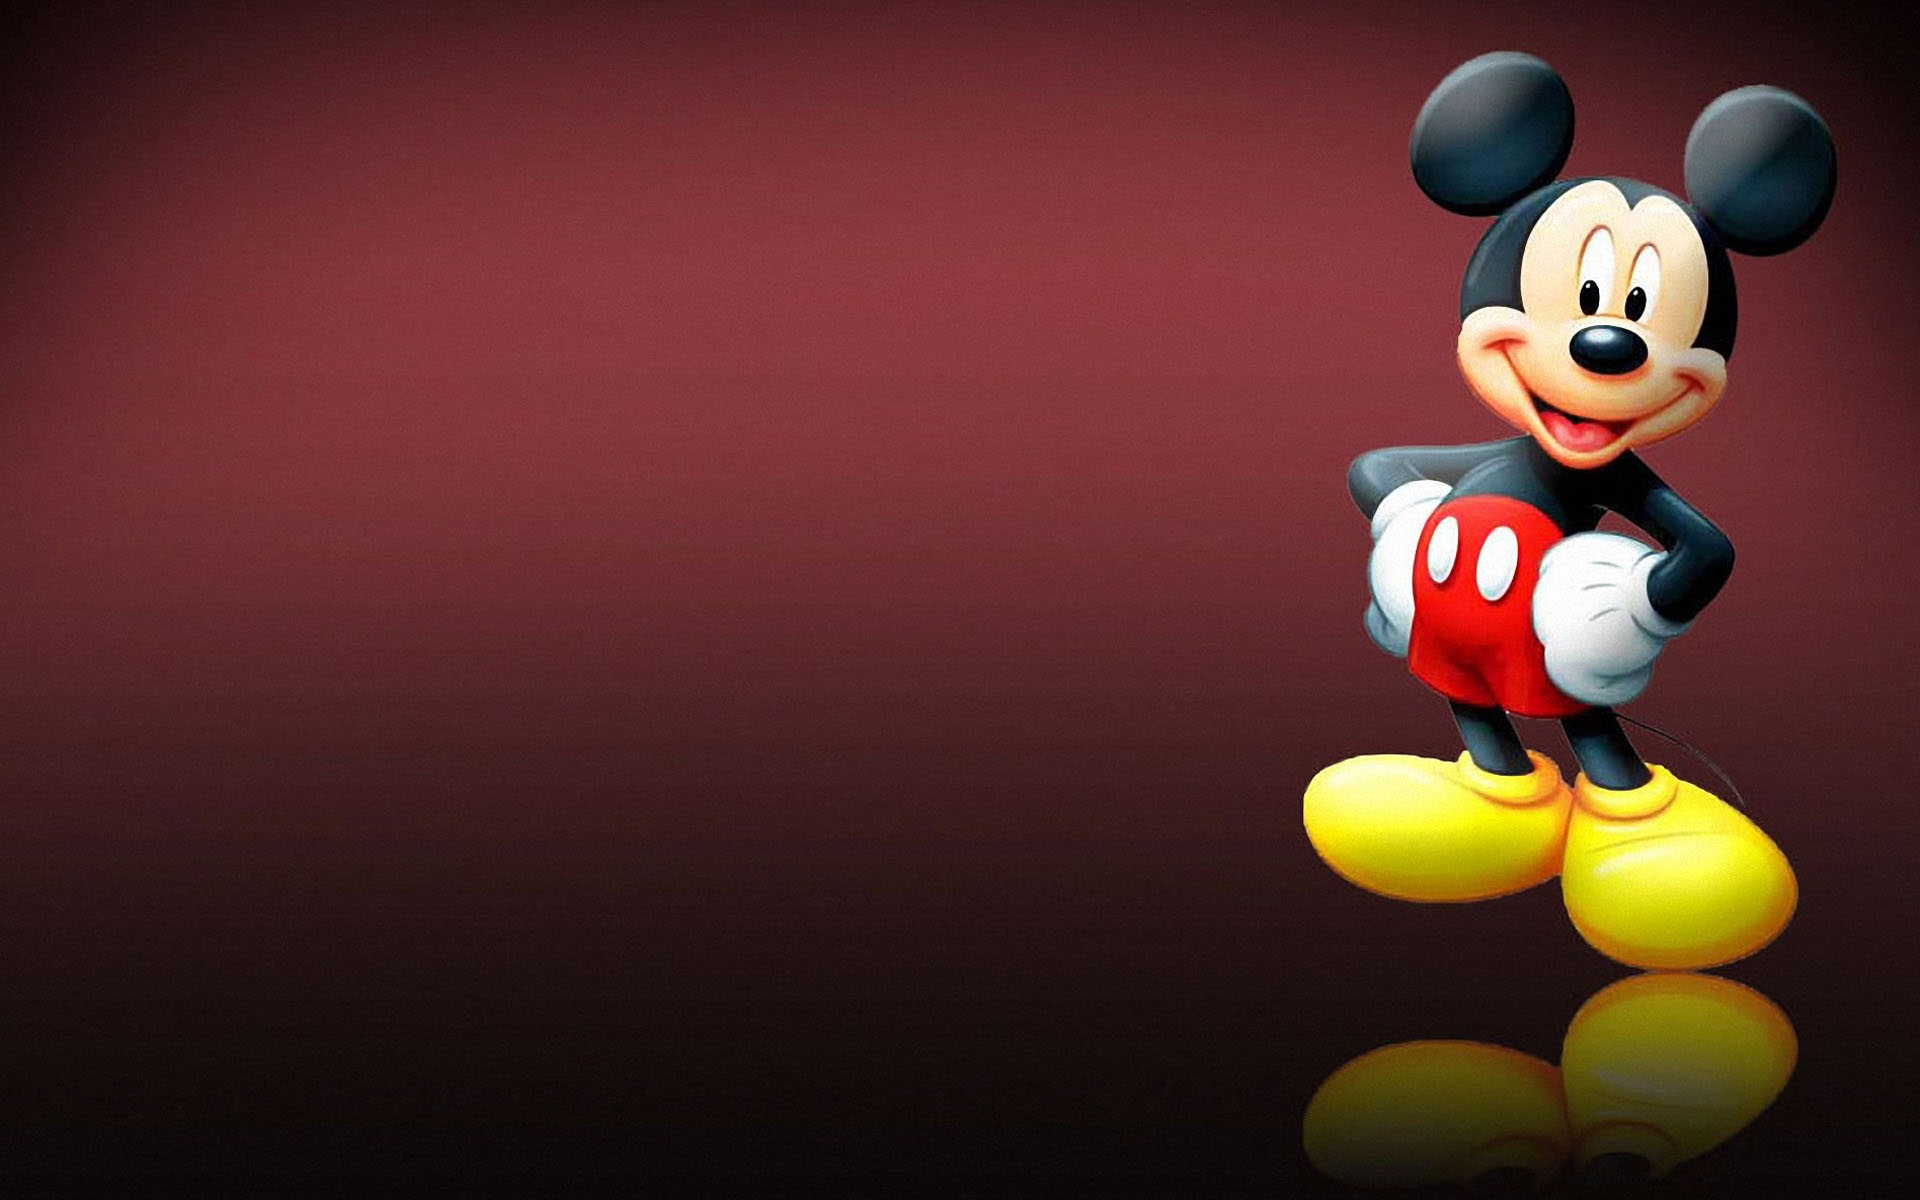 Mickey mouse wallpaper for phone